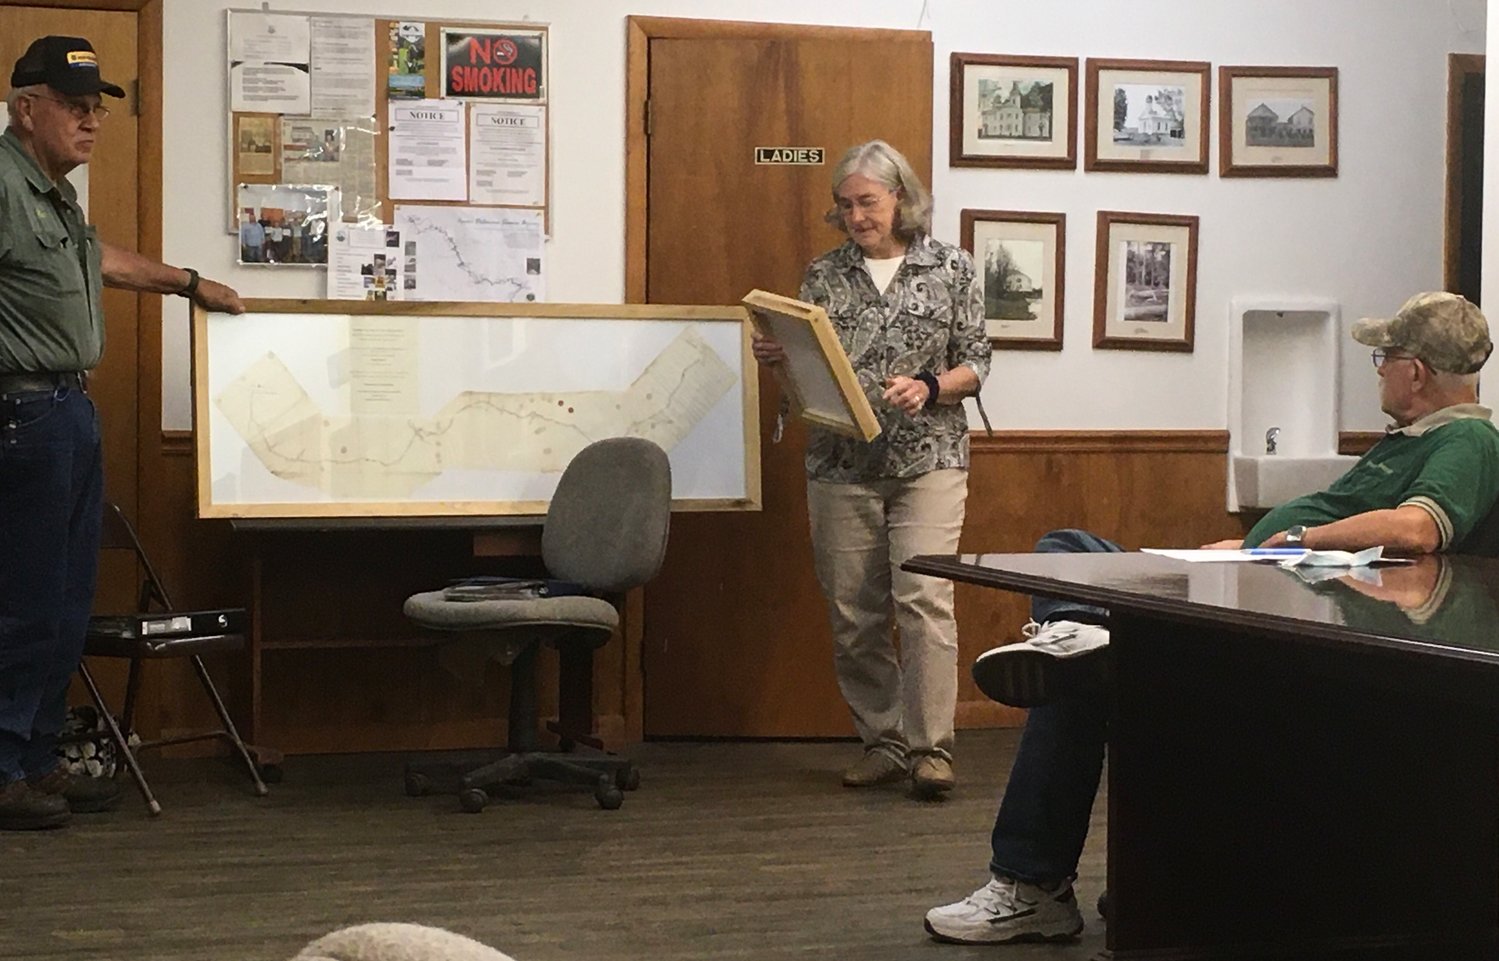 Eliece Rybak displayed an original map from 1851 to the Damascus Township Supervisors.